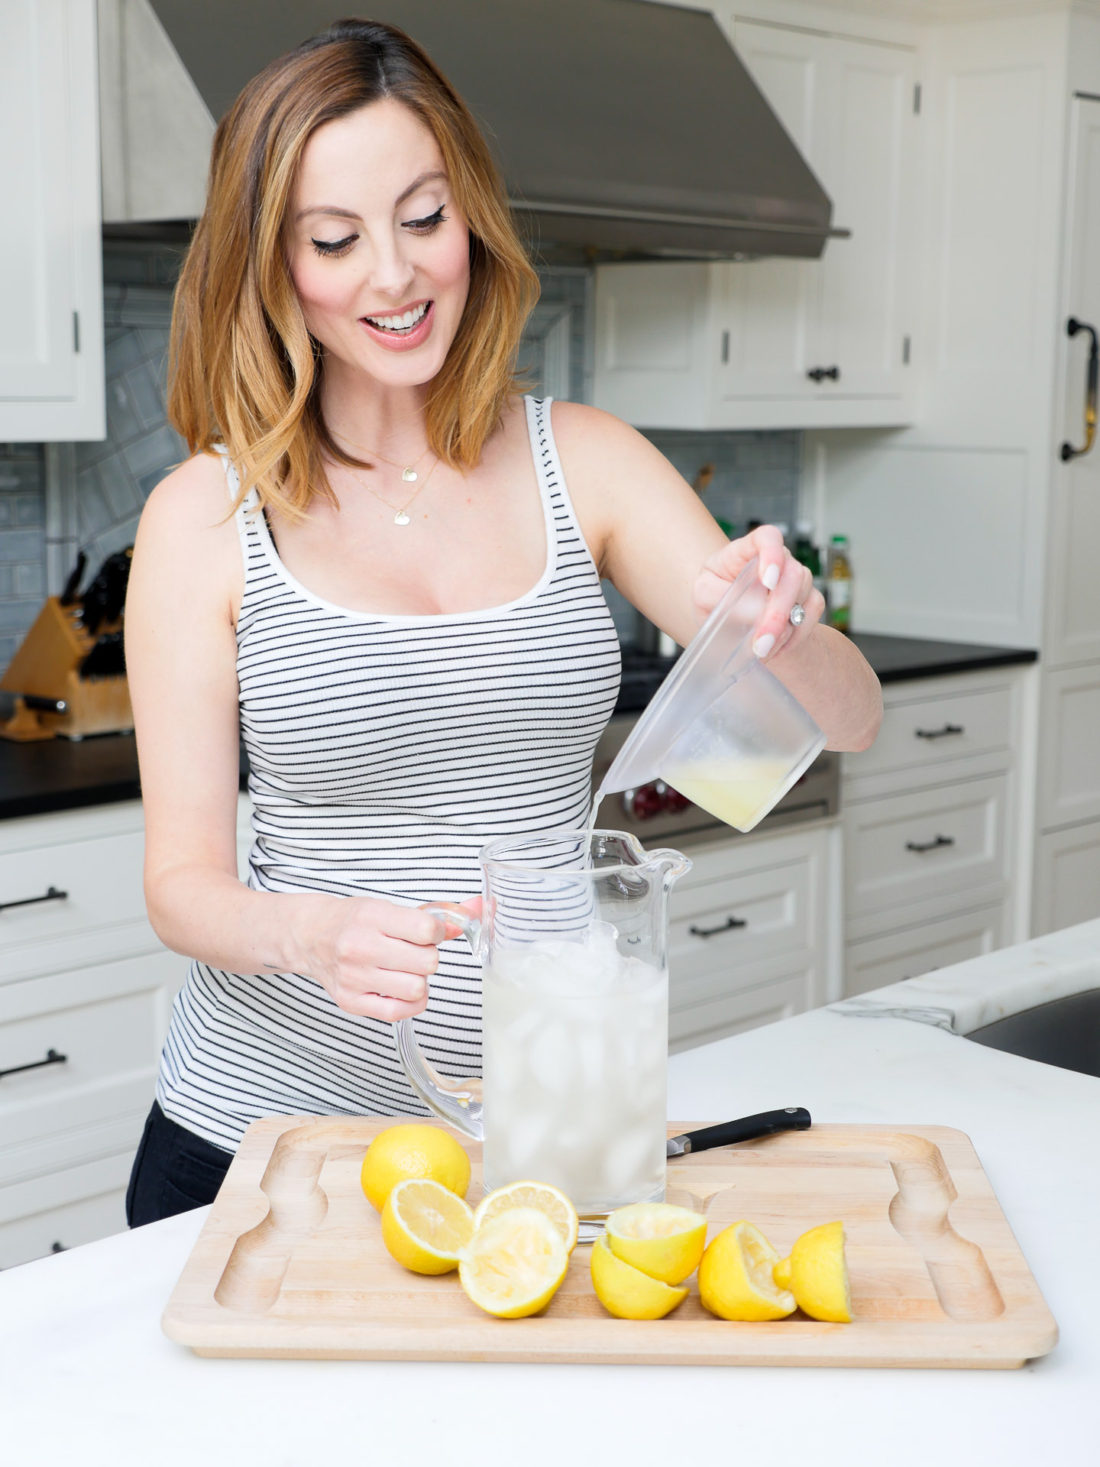 Eva Amurri Martino of lifestyle blog Happily Eva After squeezing lemons in her kitchen to make a hydrating laborade for her Home Birth